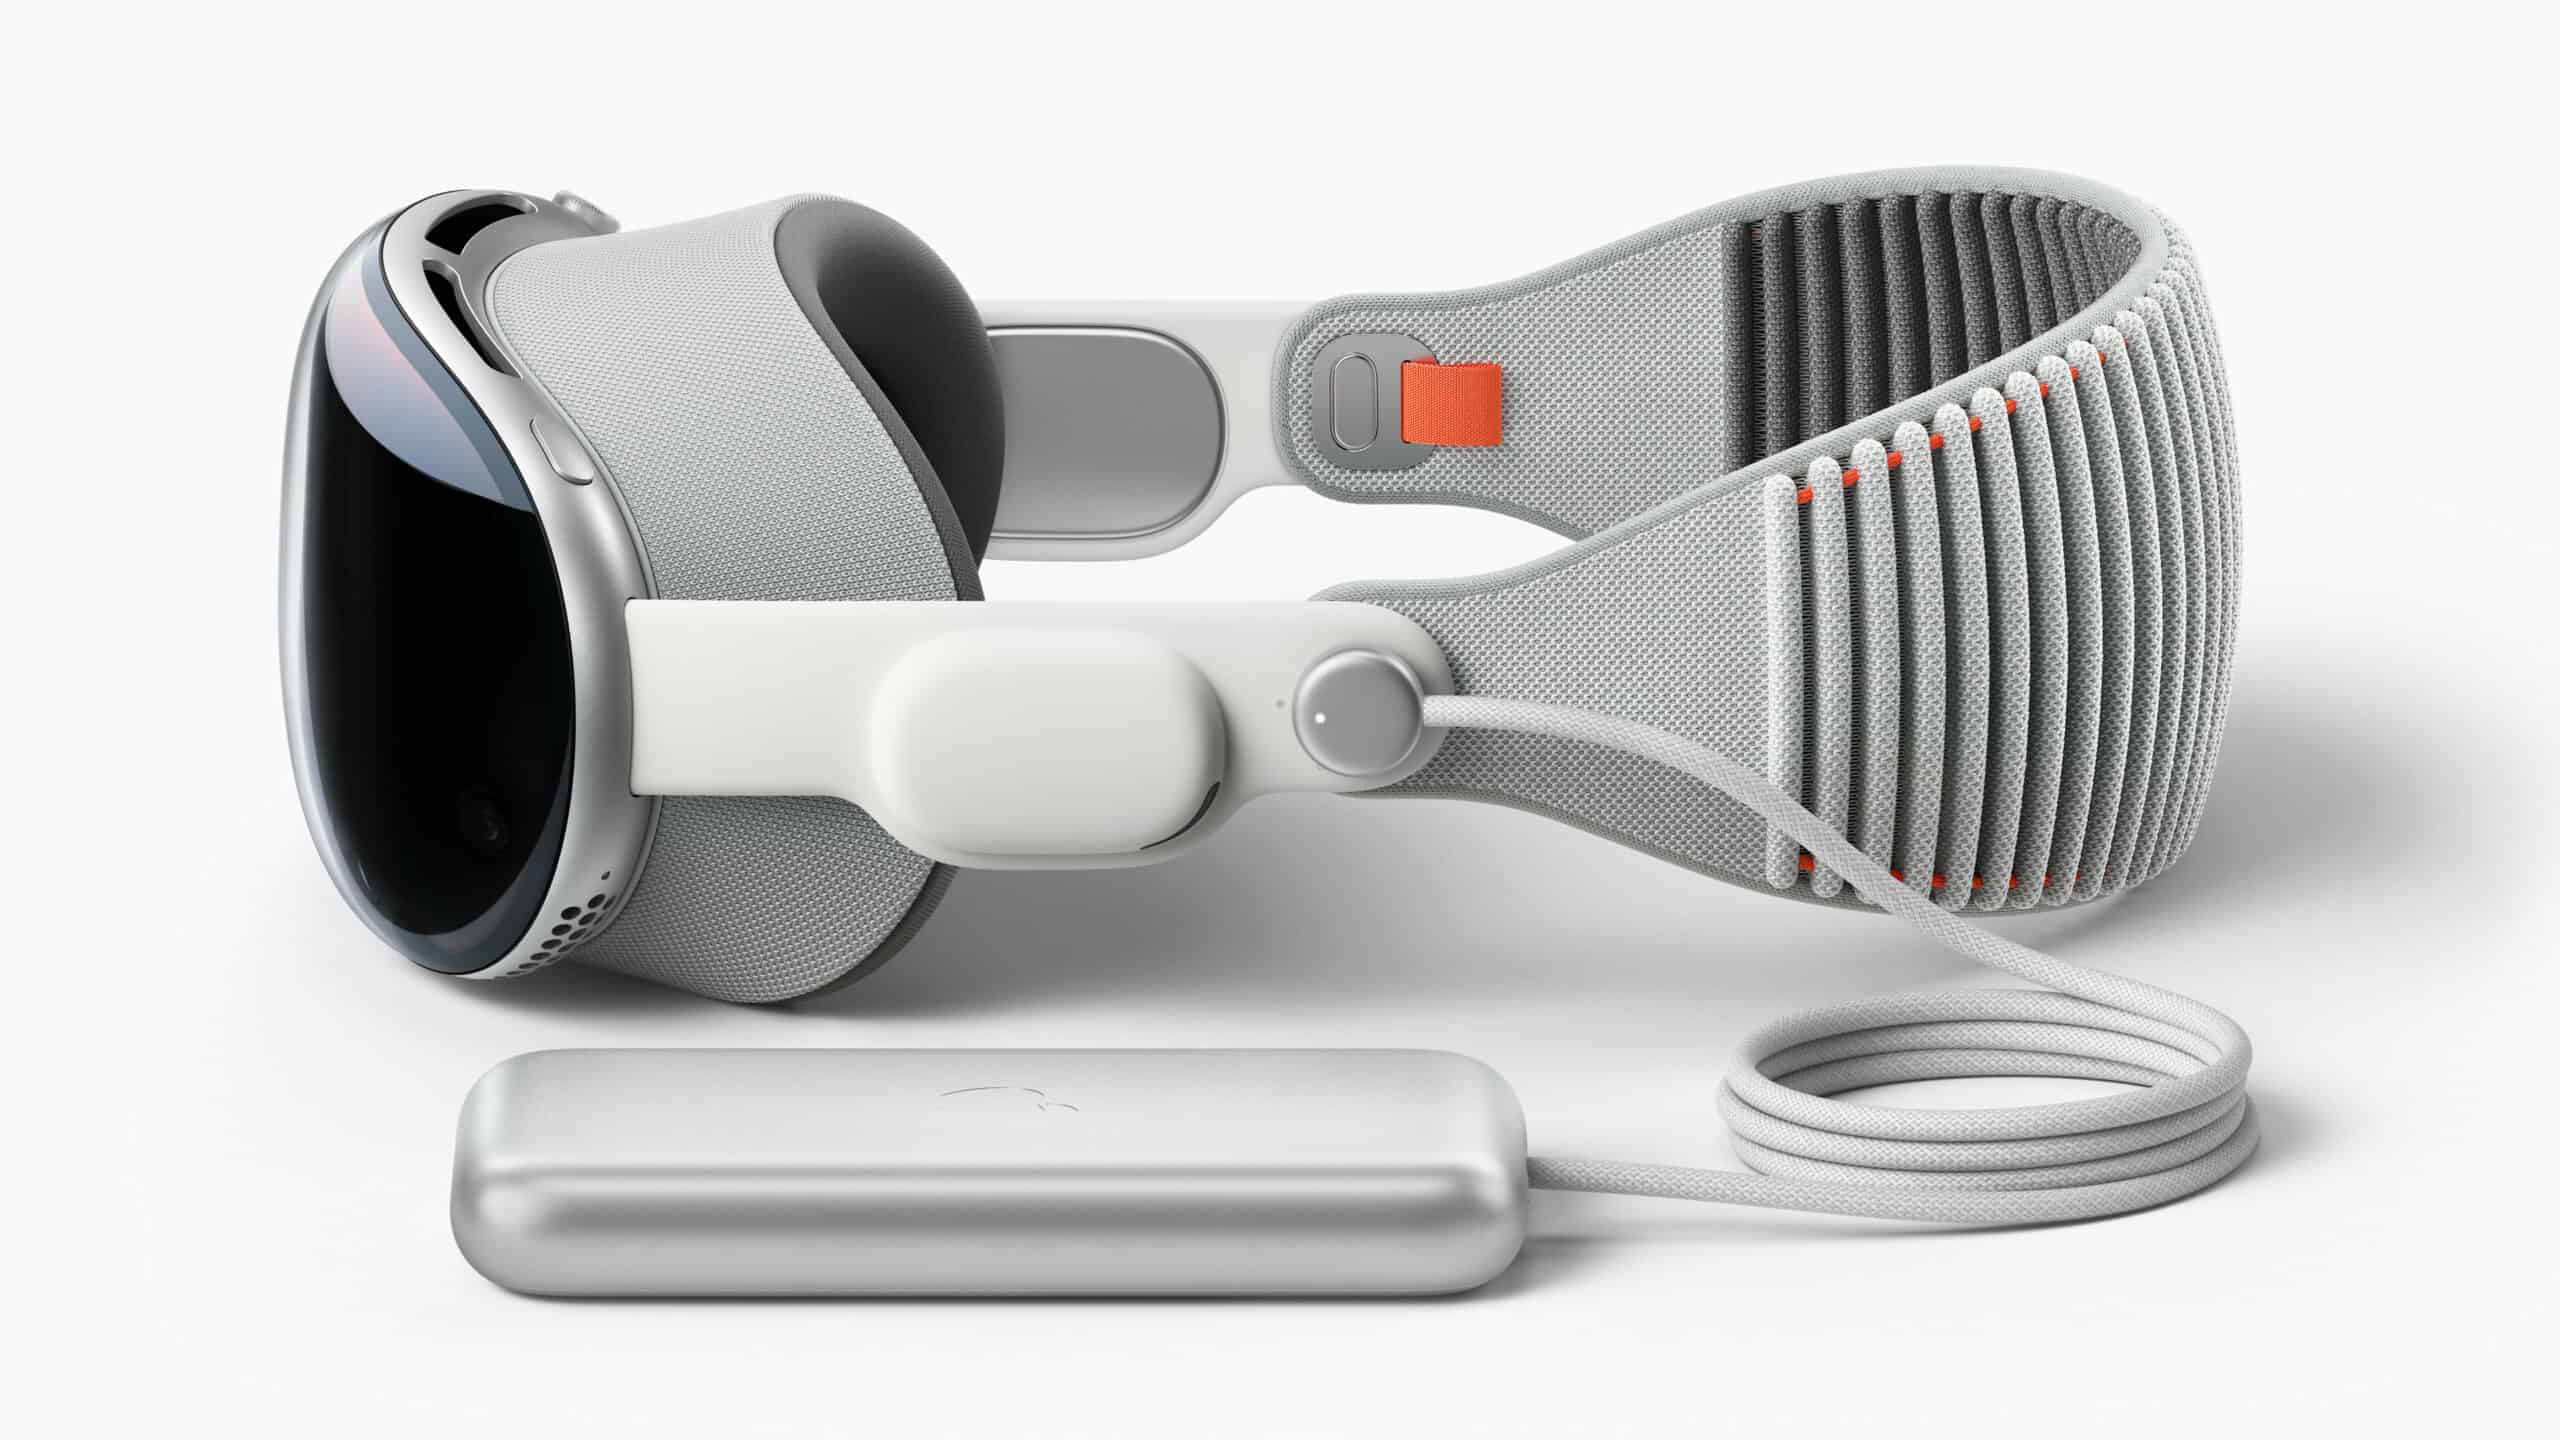 What Sets Apple’s Vision Pro Headset Apart From Competitors